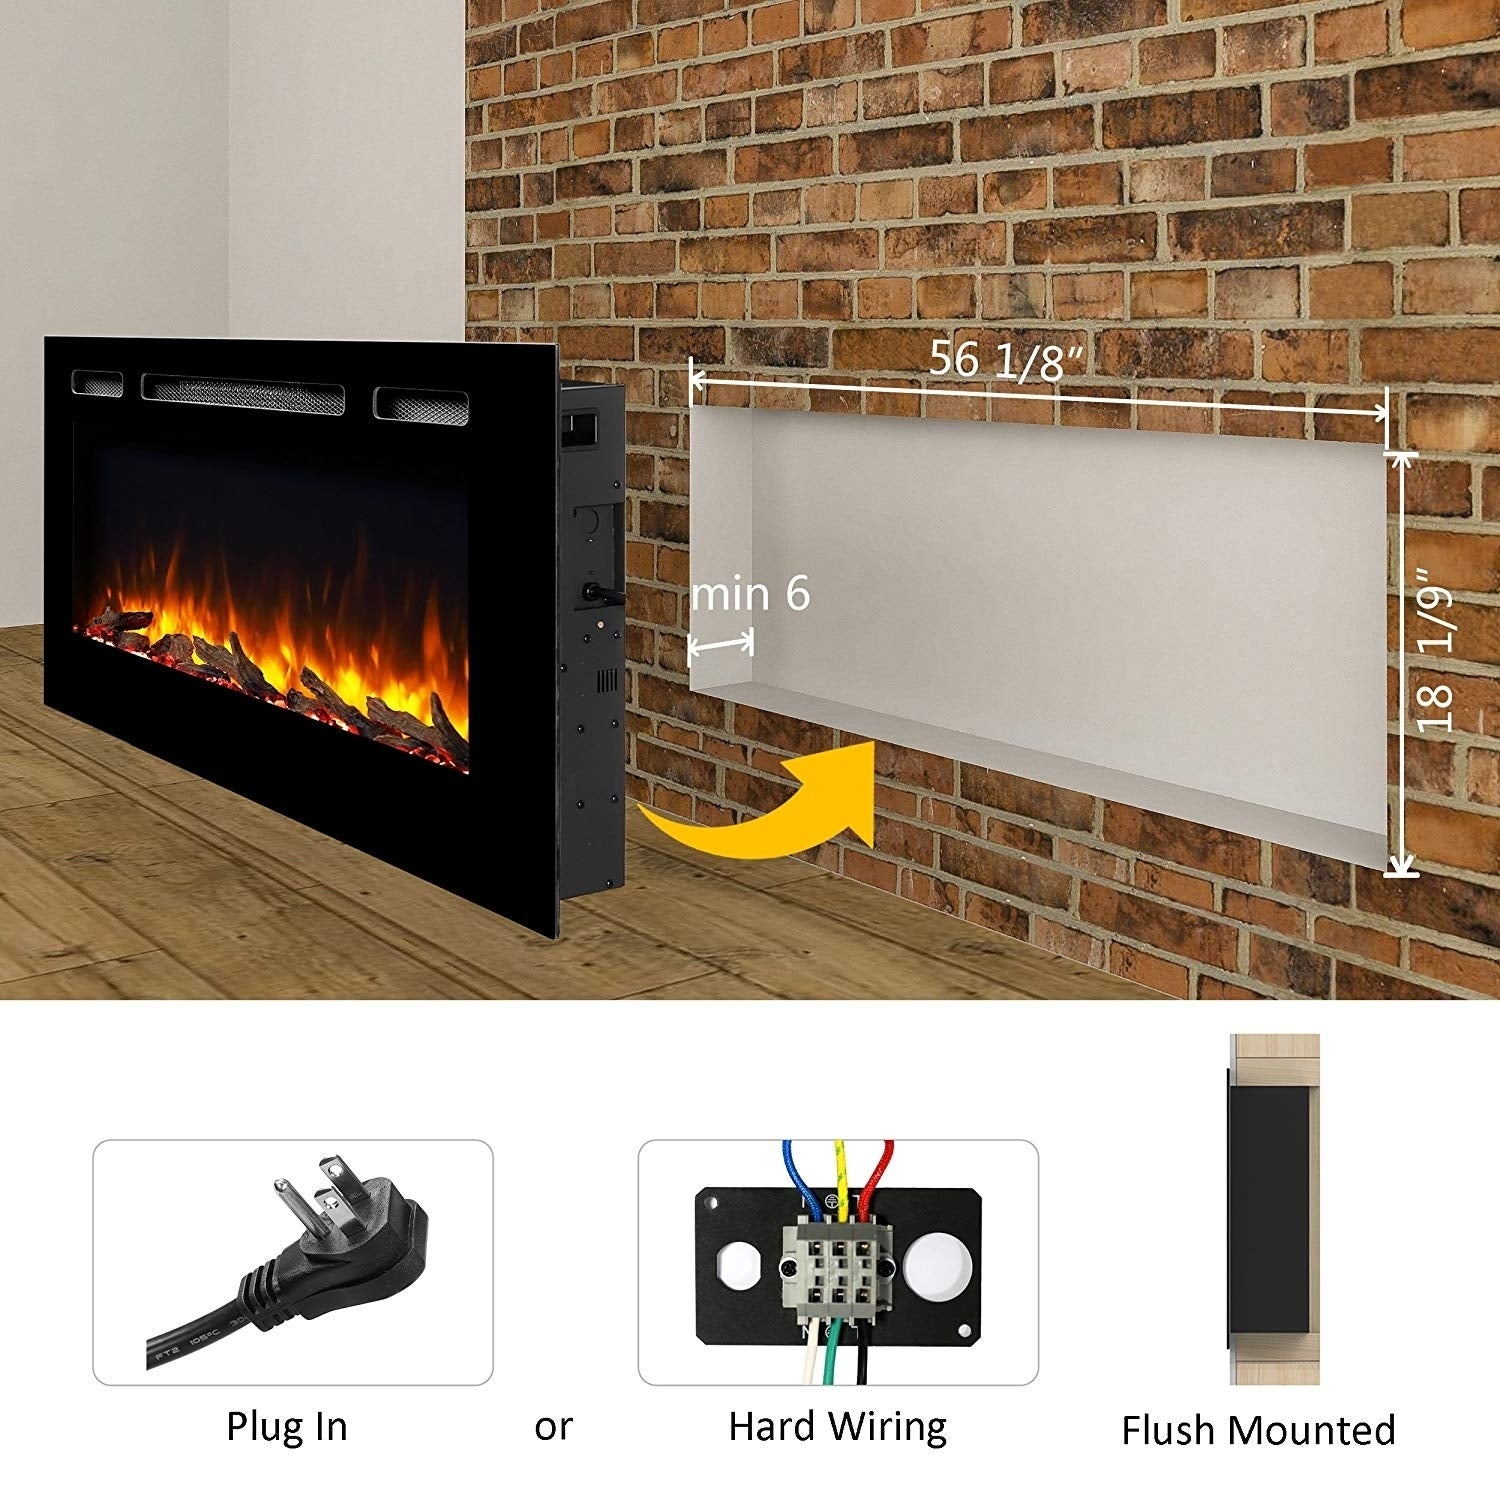 60 Alice In Wall Recessed Electric Fireplace 1500W Black 4dfc110d 830d 4830 887d f523c4949d03